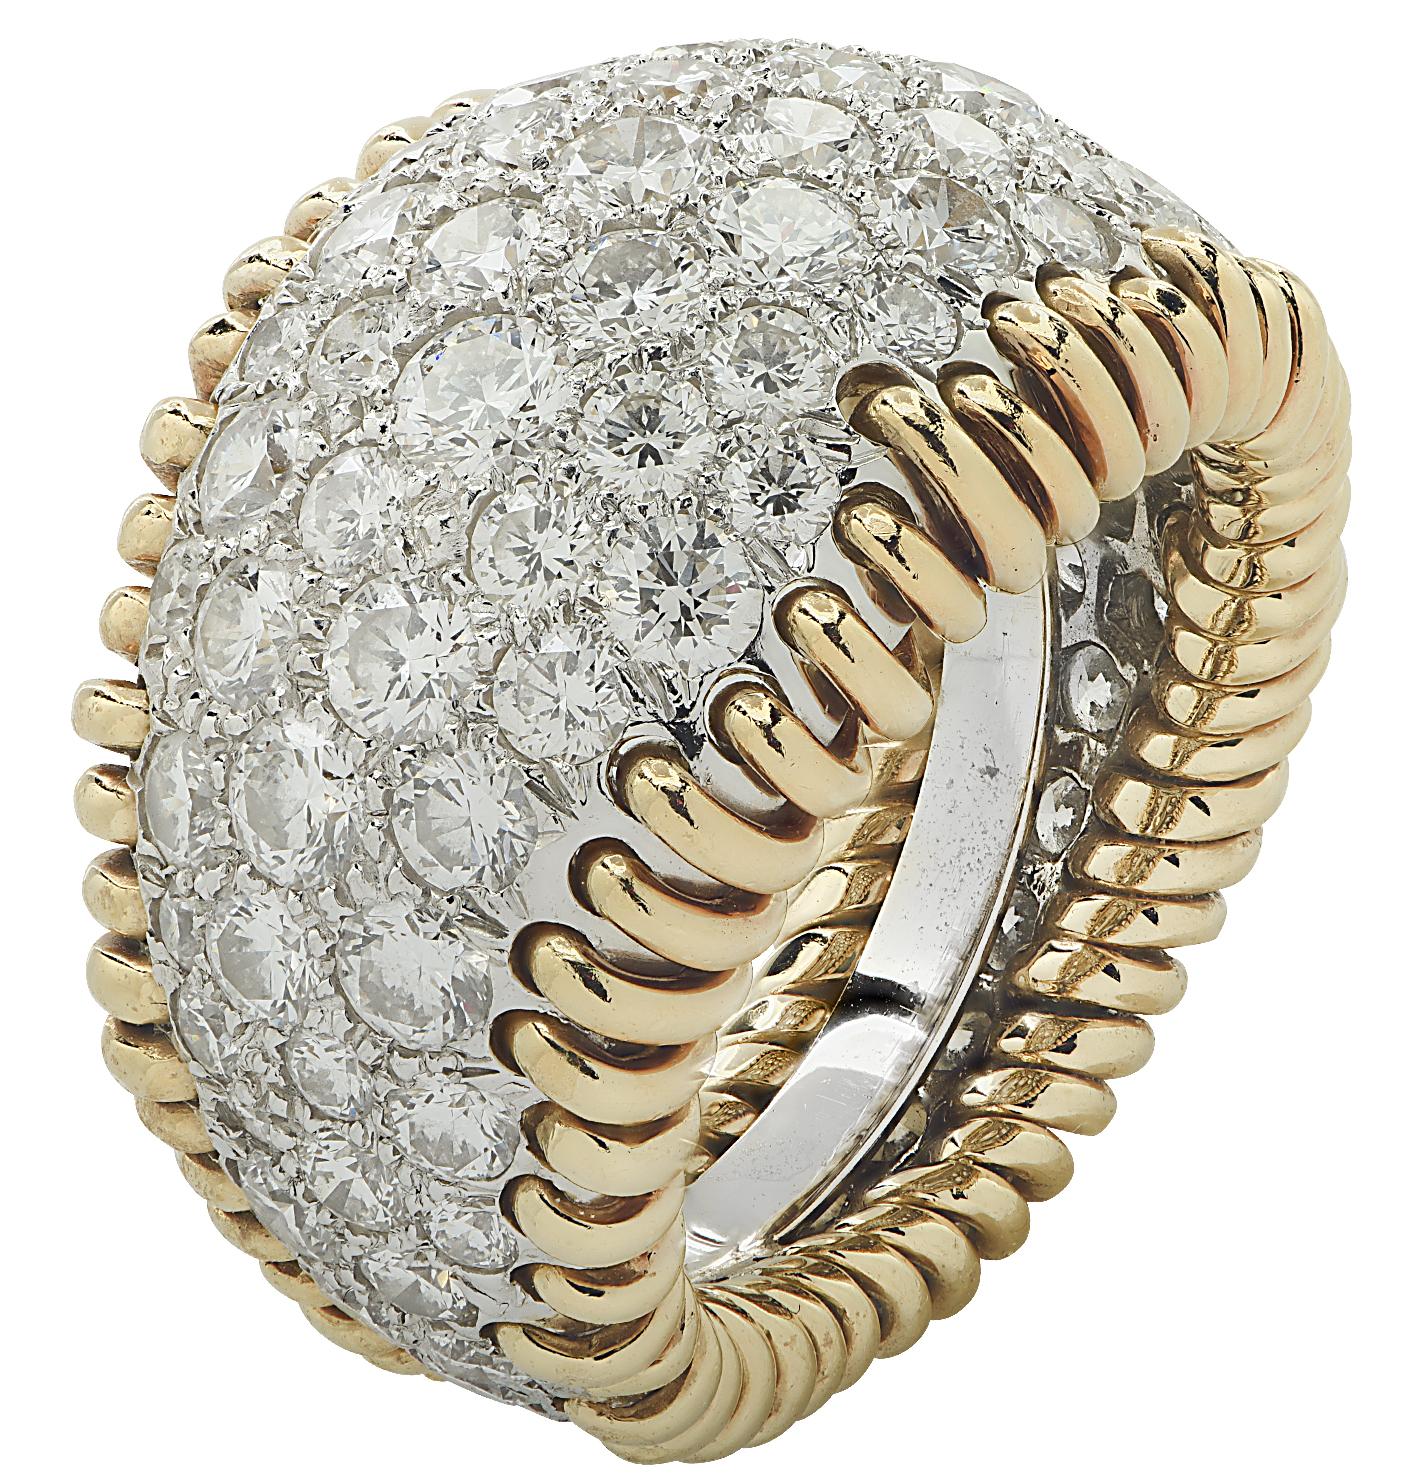 Stunning Tiffany & Co. Diamond Stitches ring by Jean Schlumberger, finely crafted in Platinum and 18 karat yellow gold featuring round brilliant cut diamonds weighing approximately 4.34 carats total, D-E color, VVS-VS clarity. The bombe ring is